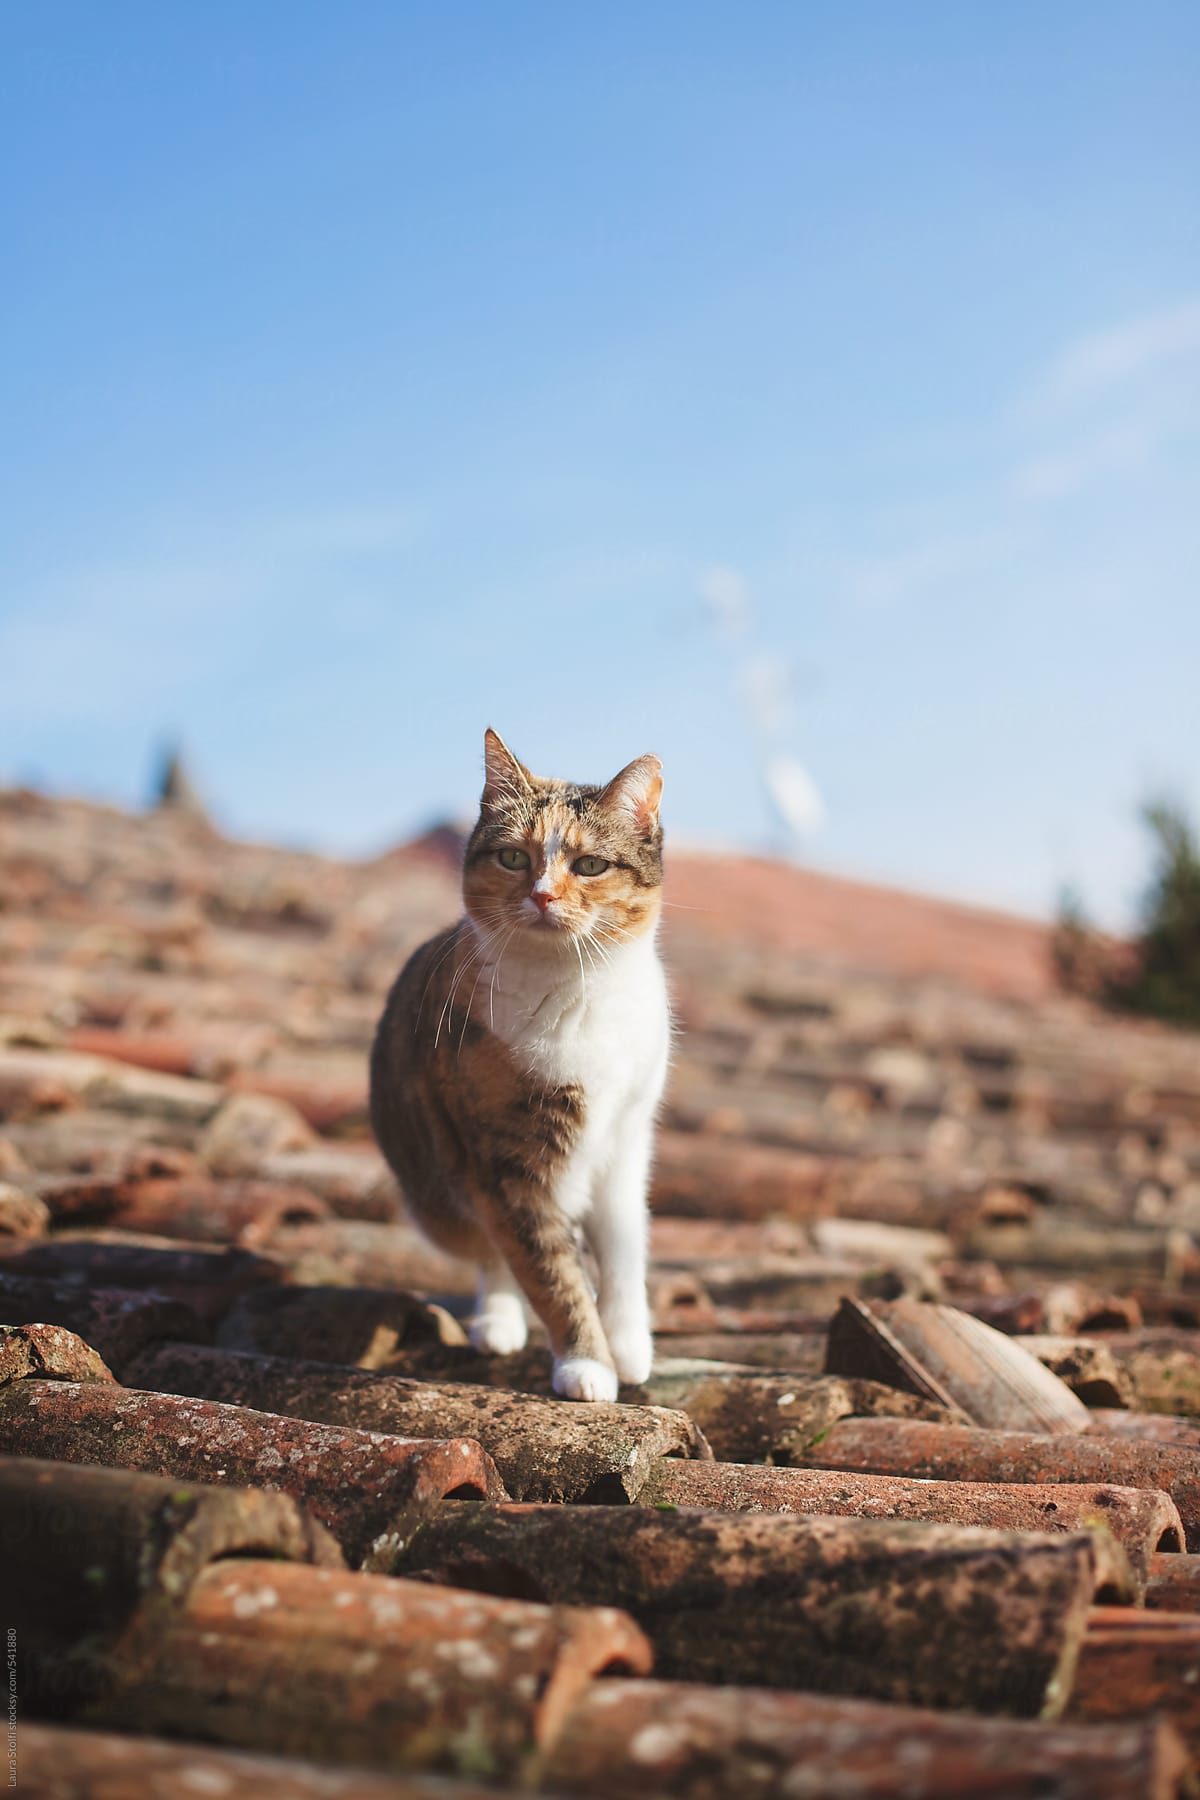 Calico cat exploring shingle roof in bright day